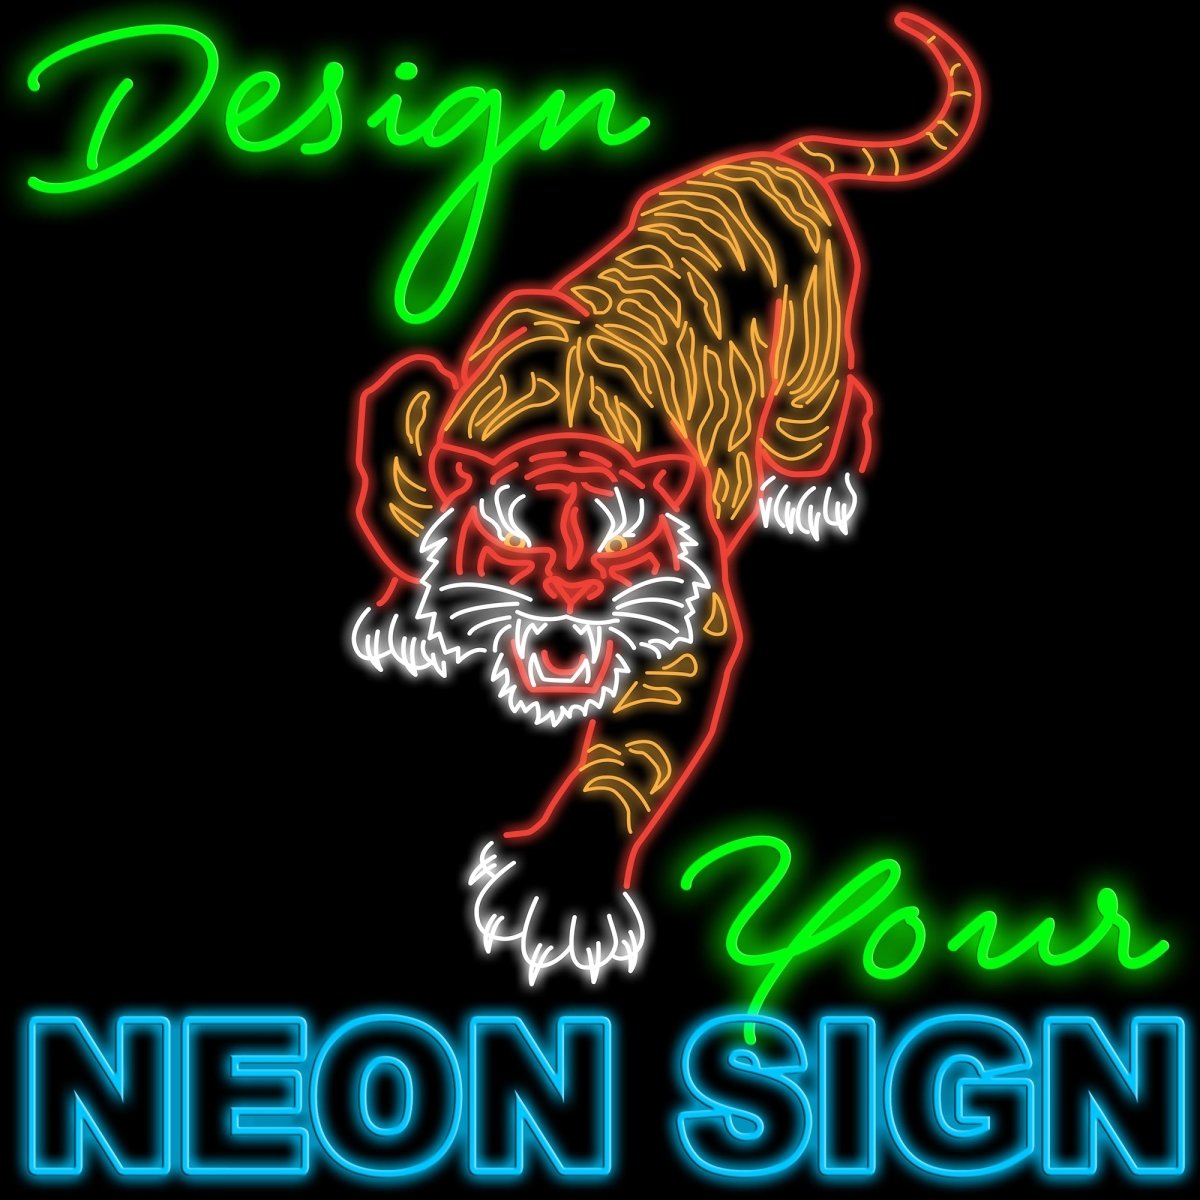 We Design Your Neon Sign - madaboutneon